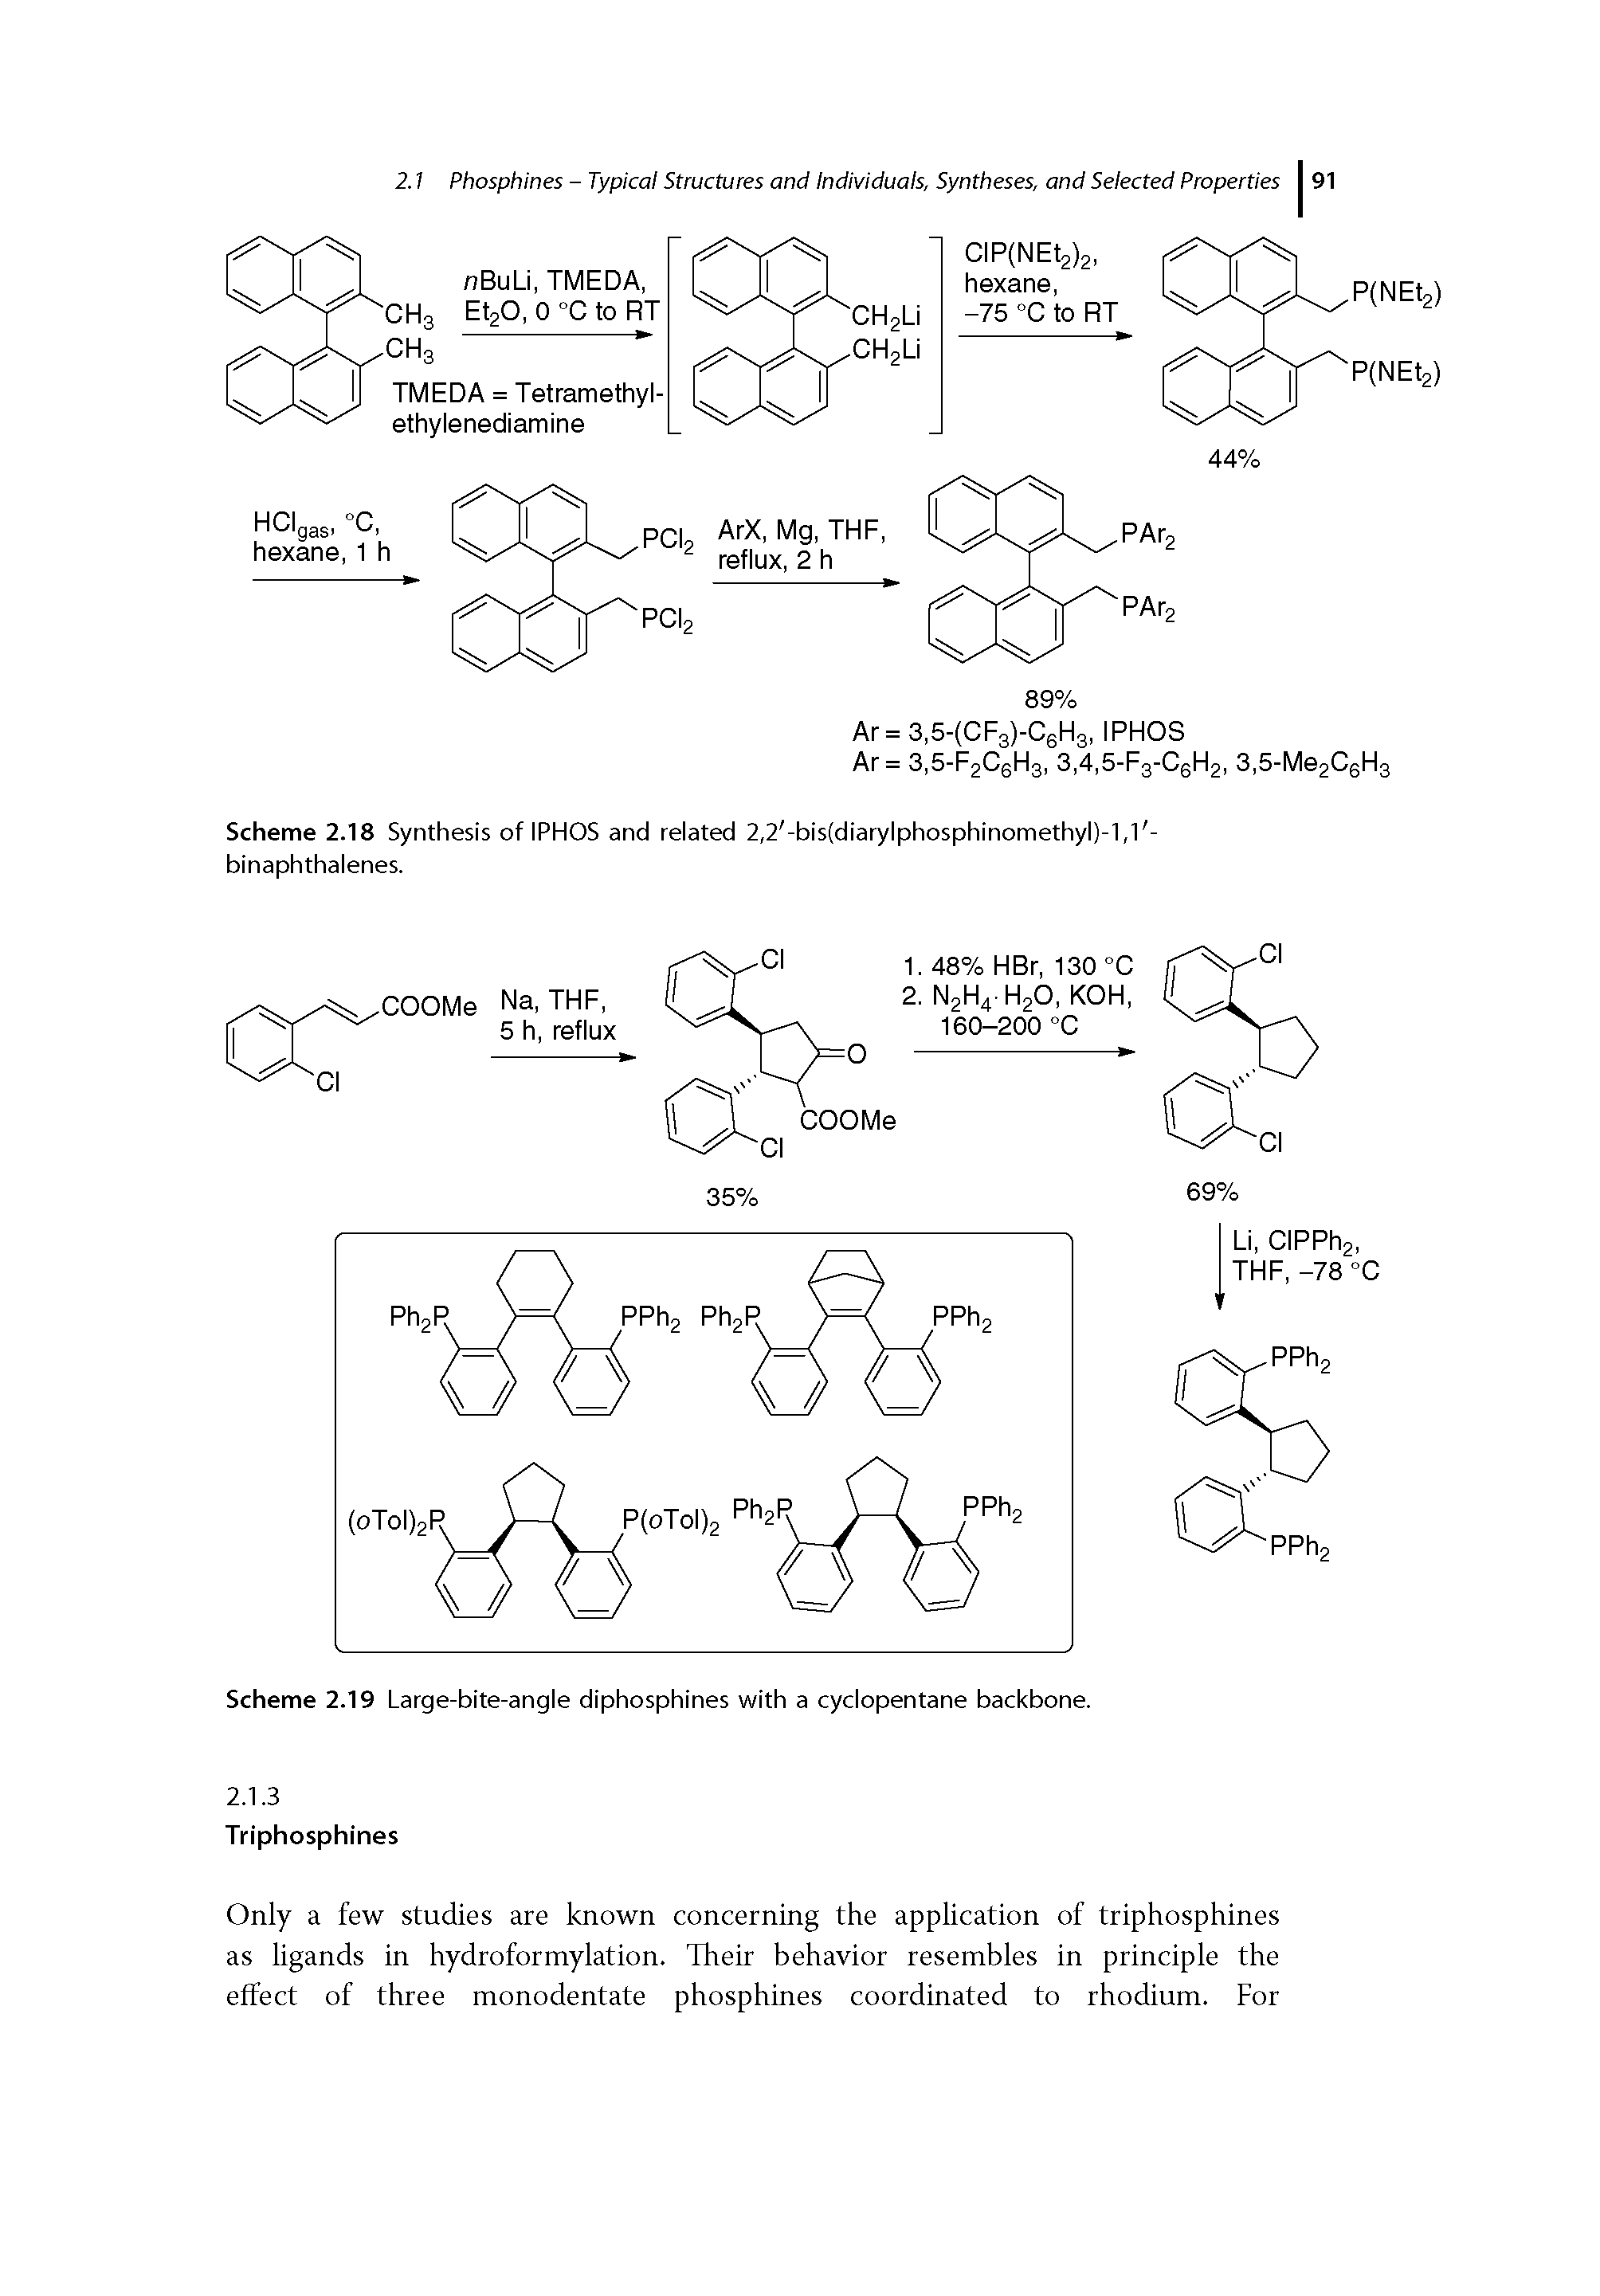 Scheme 2.19 Large-bite-angle diphosphines with a cydopentane backbone. 2.1.3...